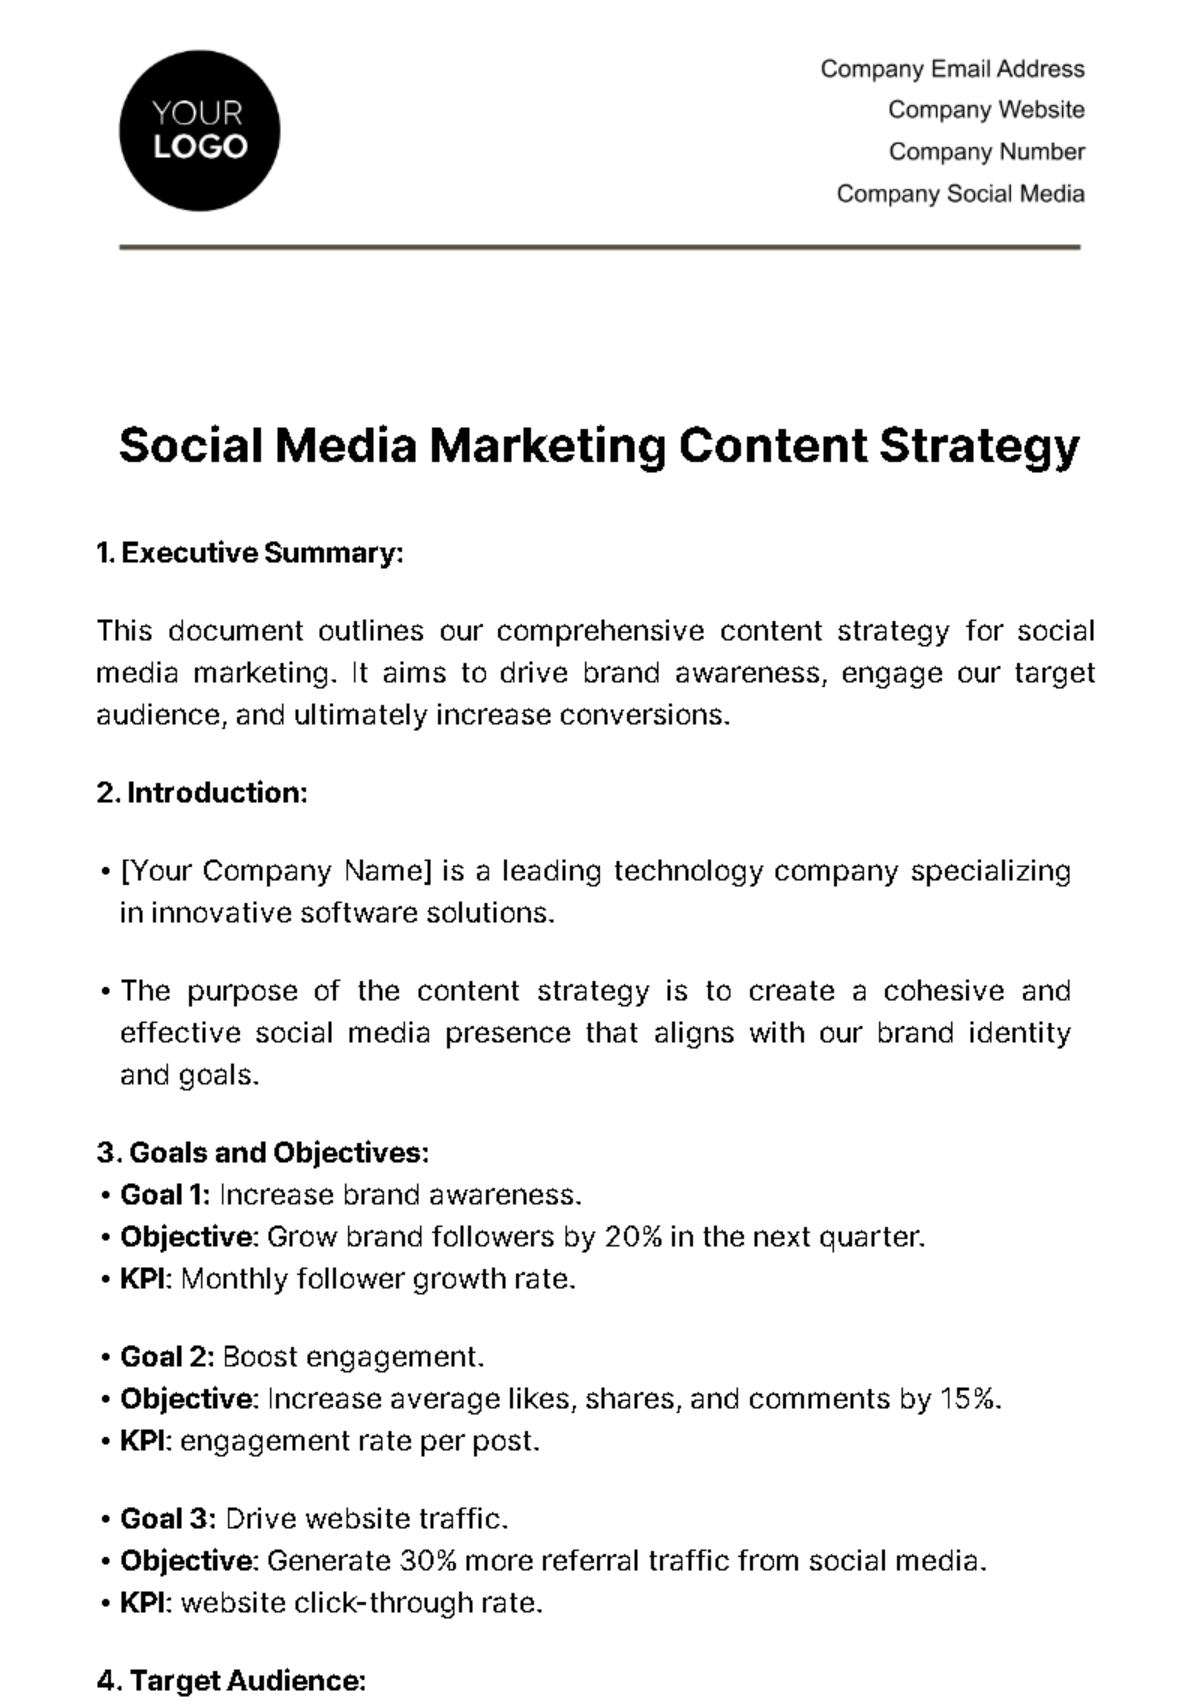 Social Media Marketing Content Strategy Outline Template